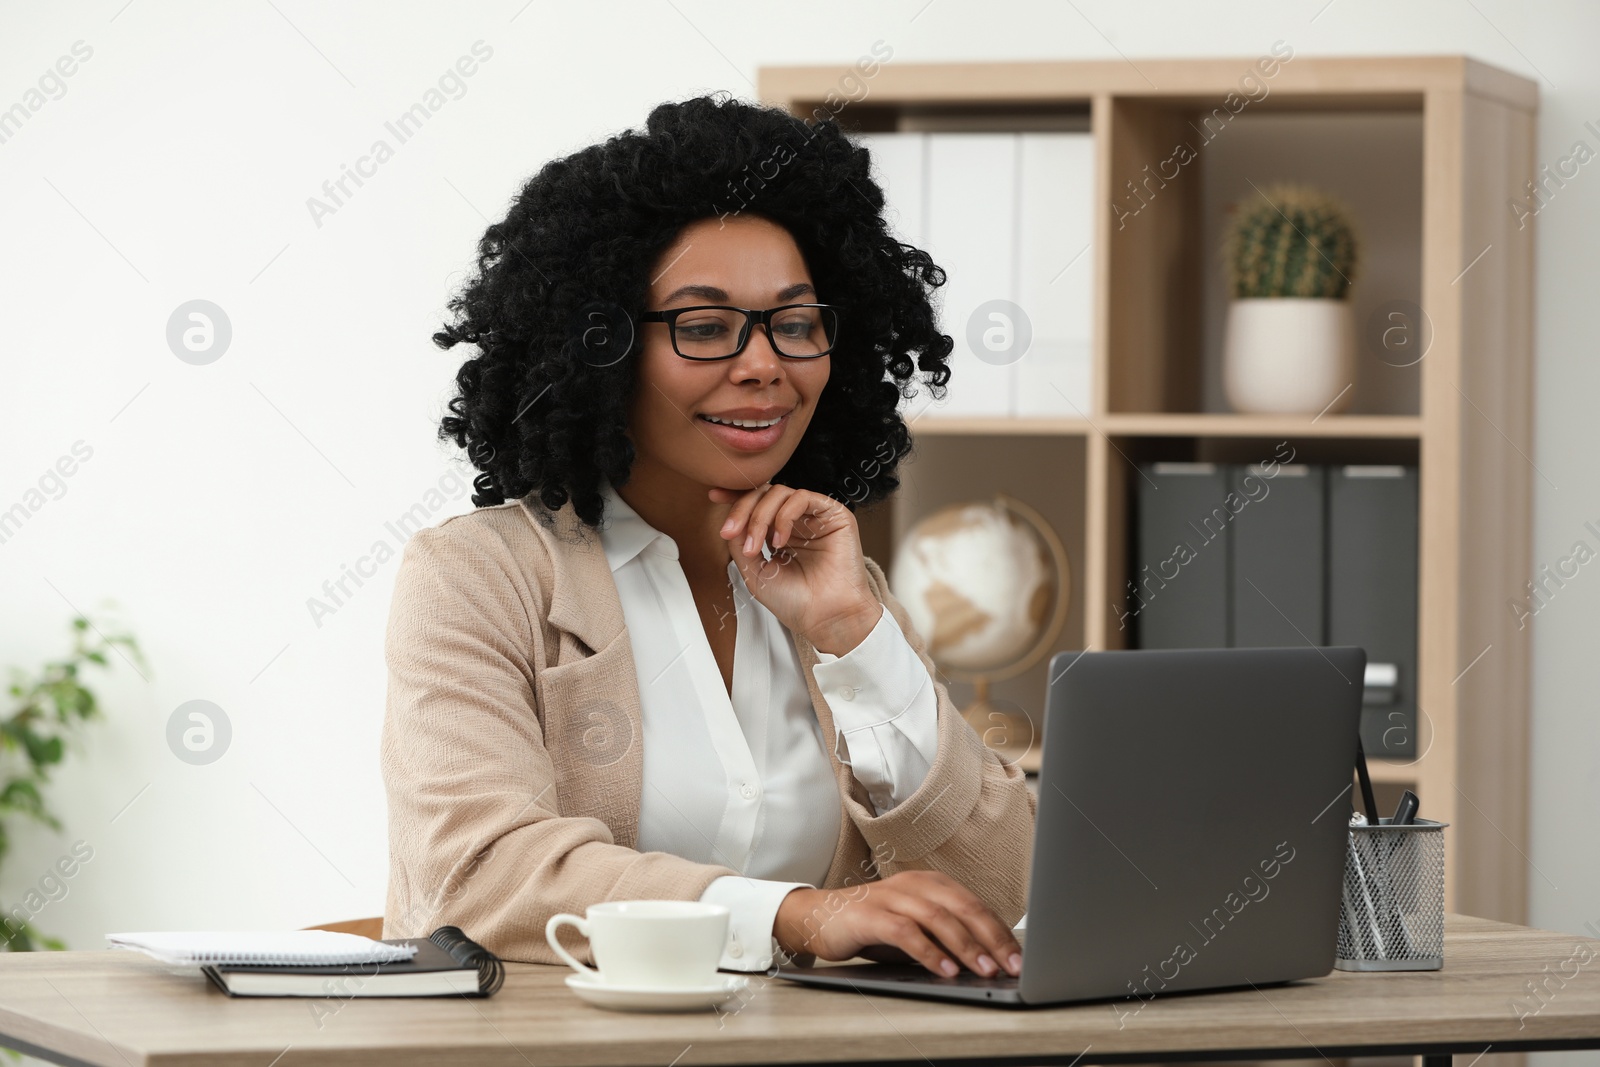 Photo of Happy young woman using laptop at wooden desk indoors